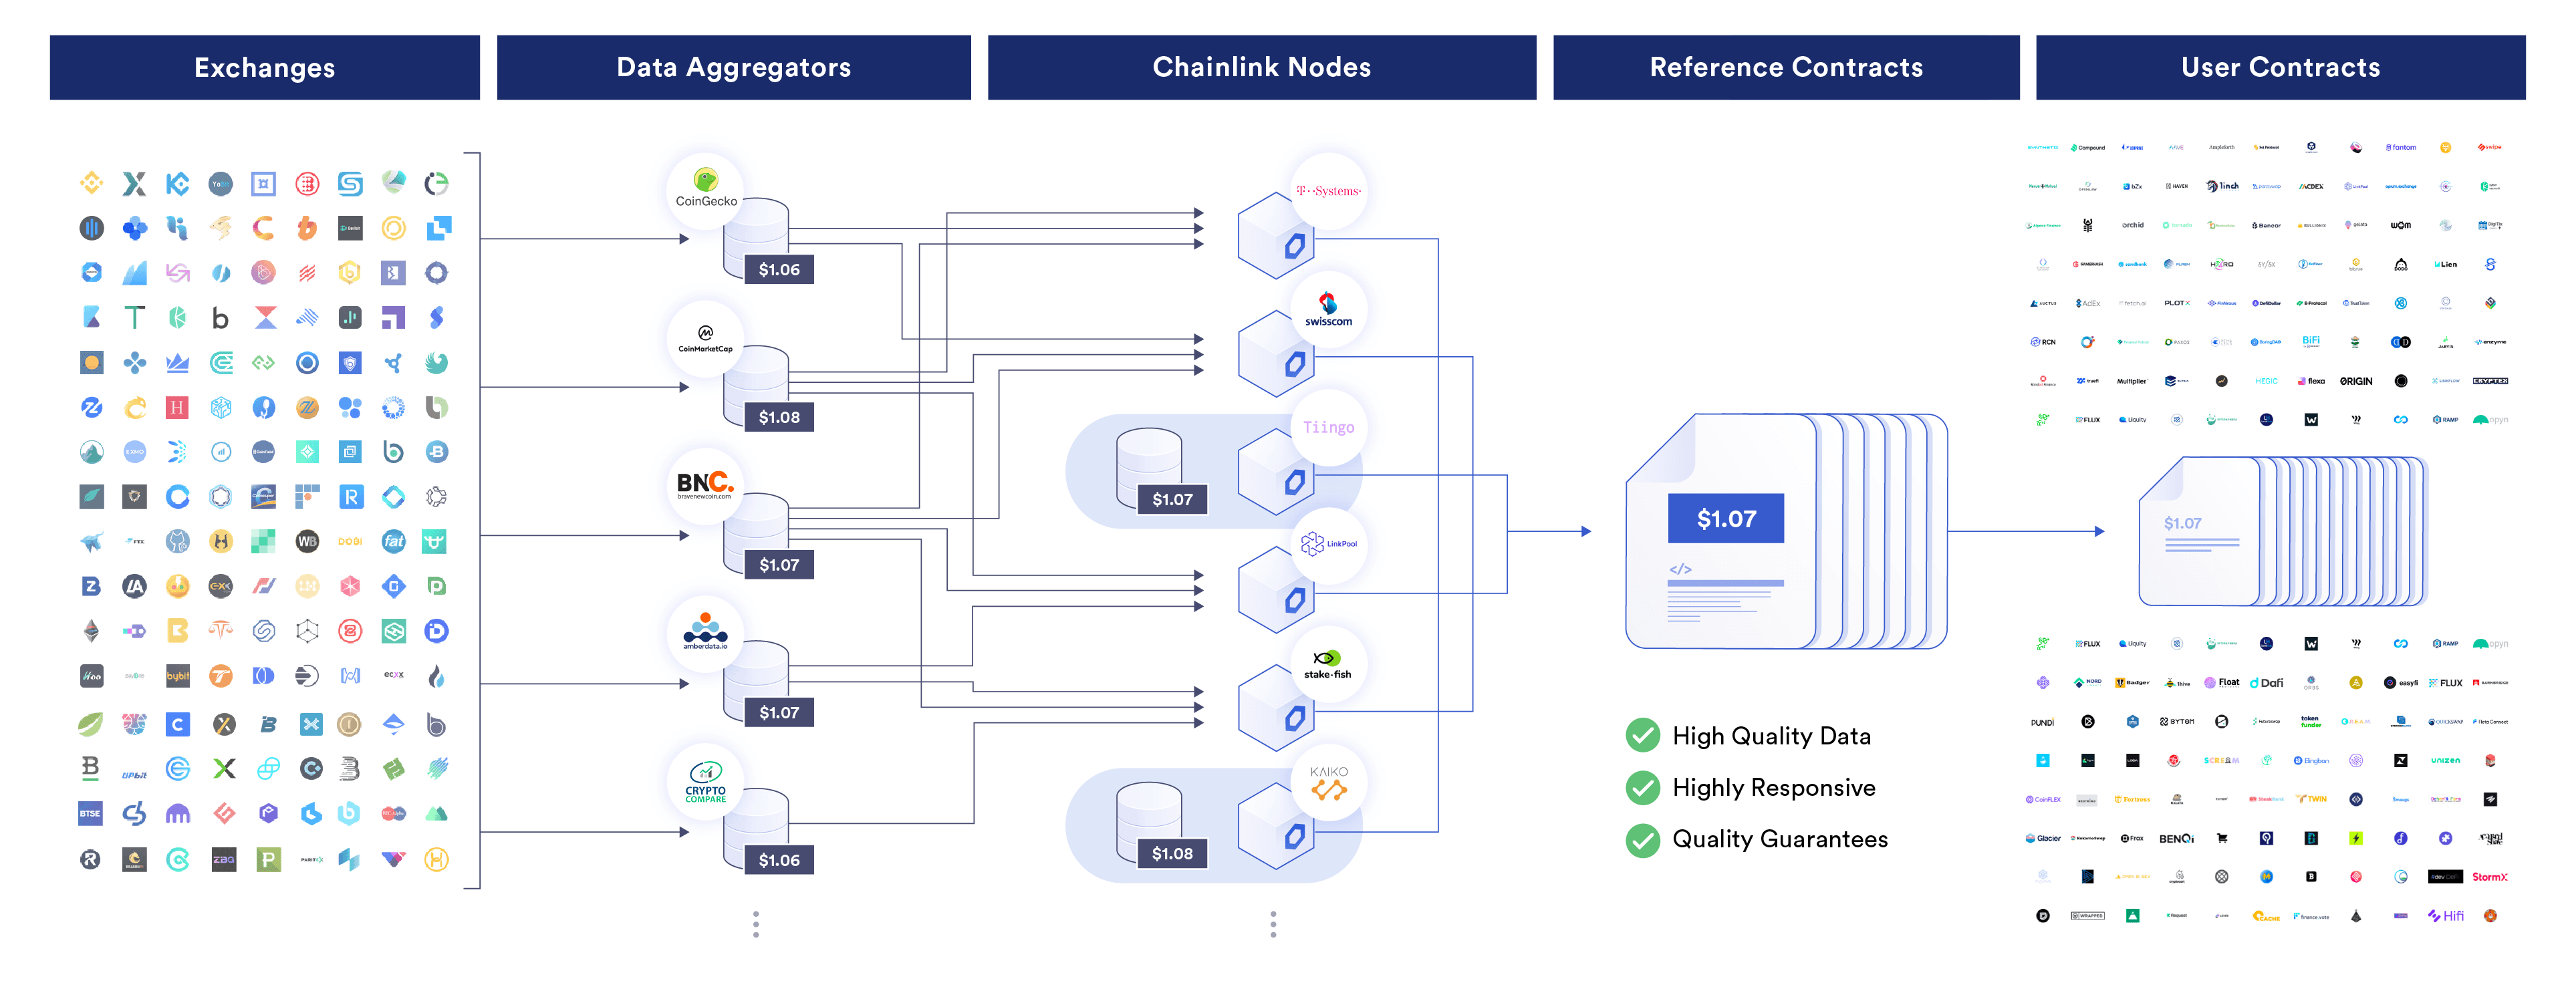 Chainlink Price Feeds offers a shared truth to all DeFi participants